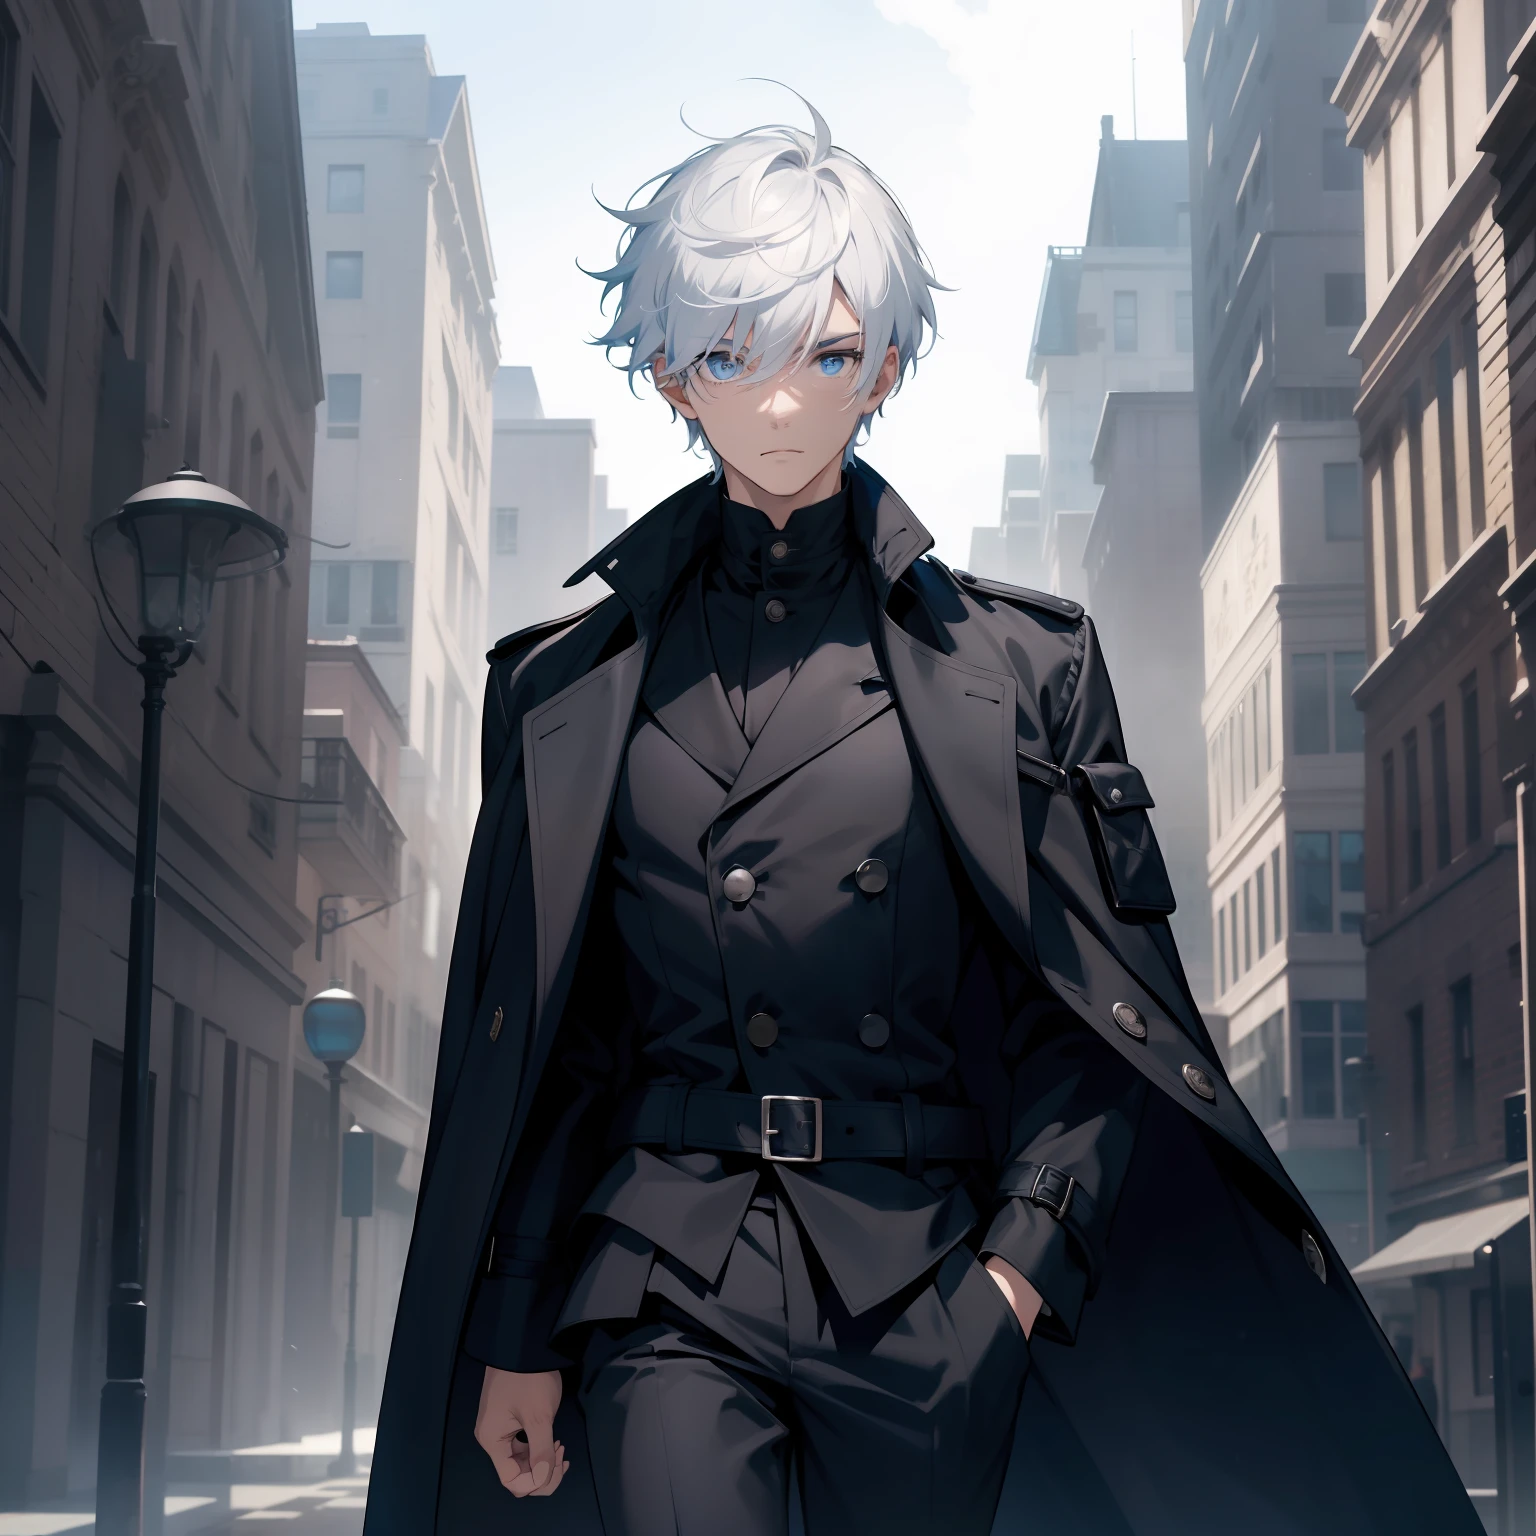 A boy，Blue pupil，a black trench coat，Wear short white sleeves underneath，Short white hair over the eyebrows，Tall and tall，Hair with well-defined lines，Daytime background